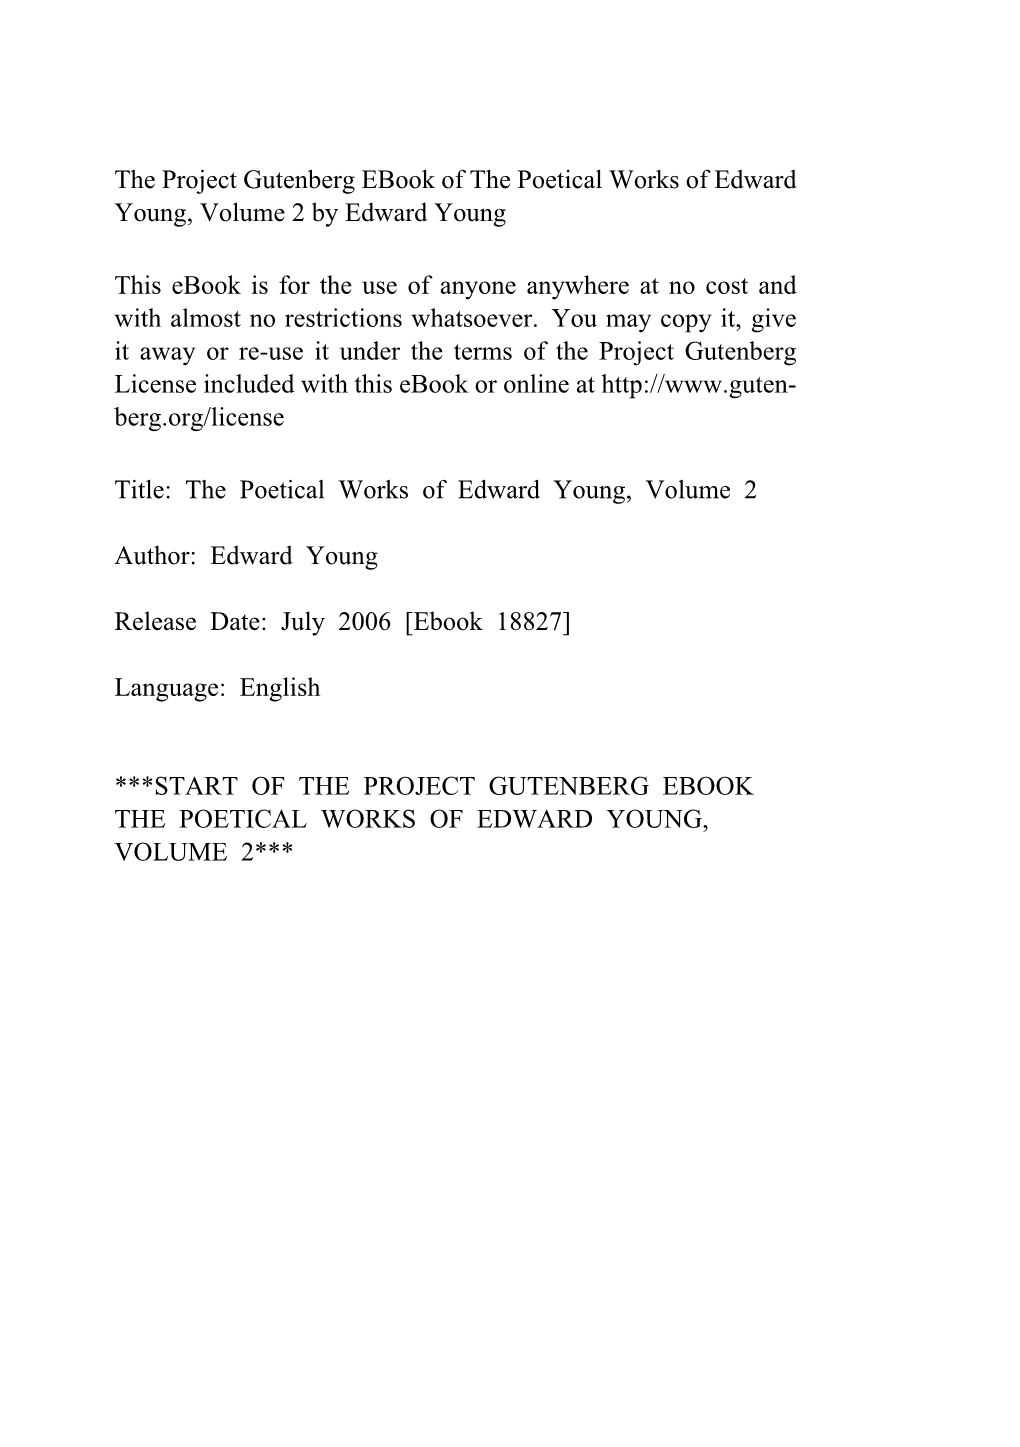 The Poetical Works of Edward Young, Volume 2 by Edward Young